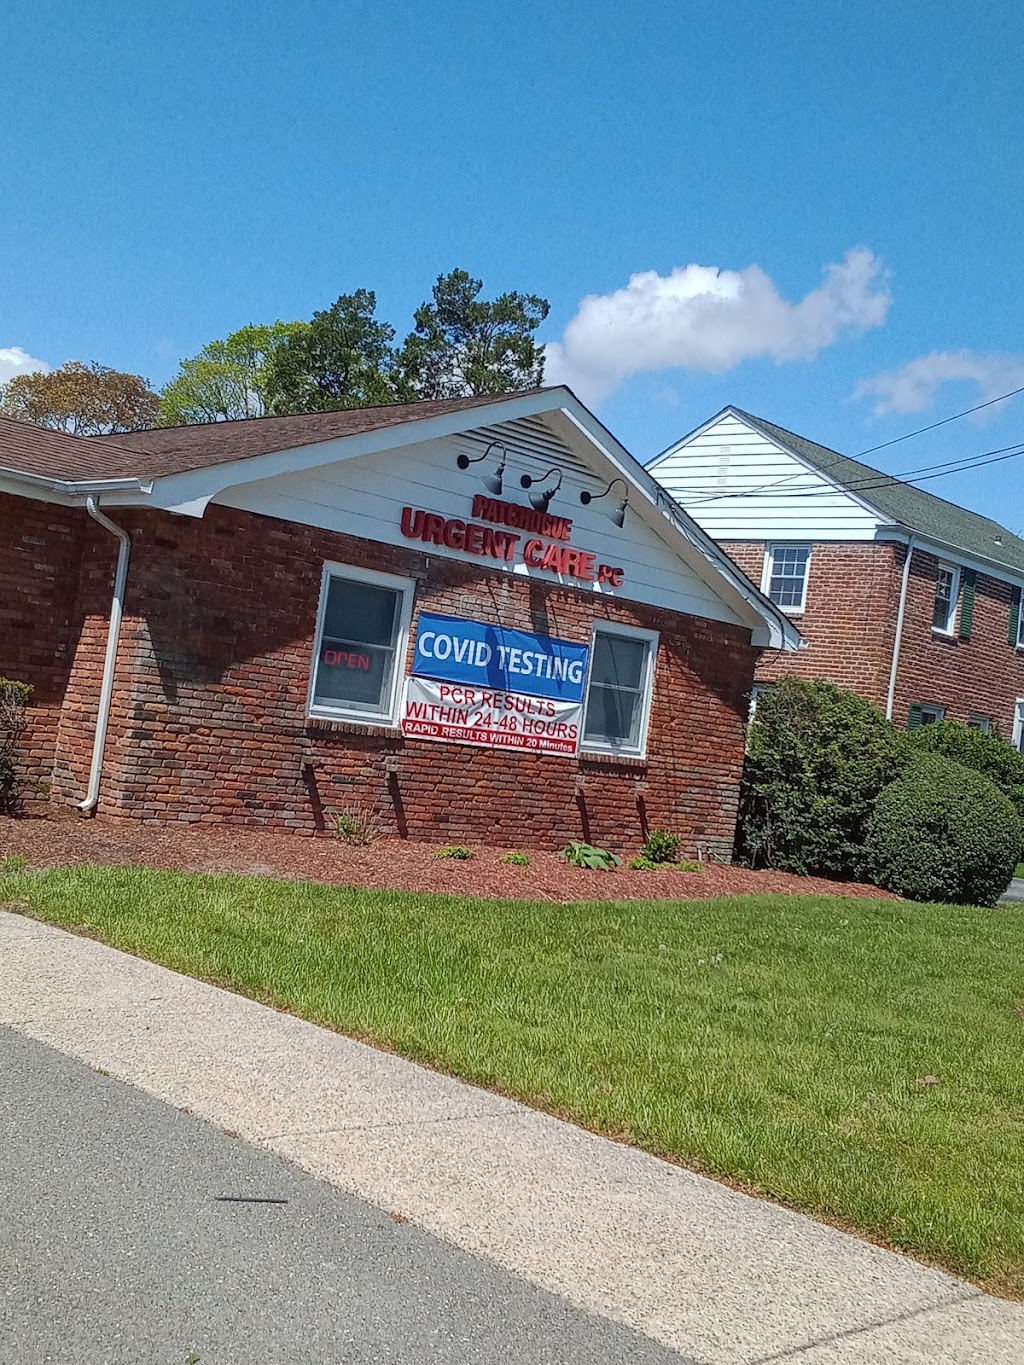 Patchogue Urgent Care, P.C. | 152 N Ocean Ave, Patchogue, NY 11772 | Phone: (631) 730-1189